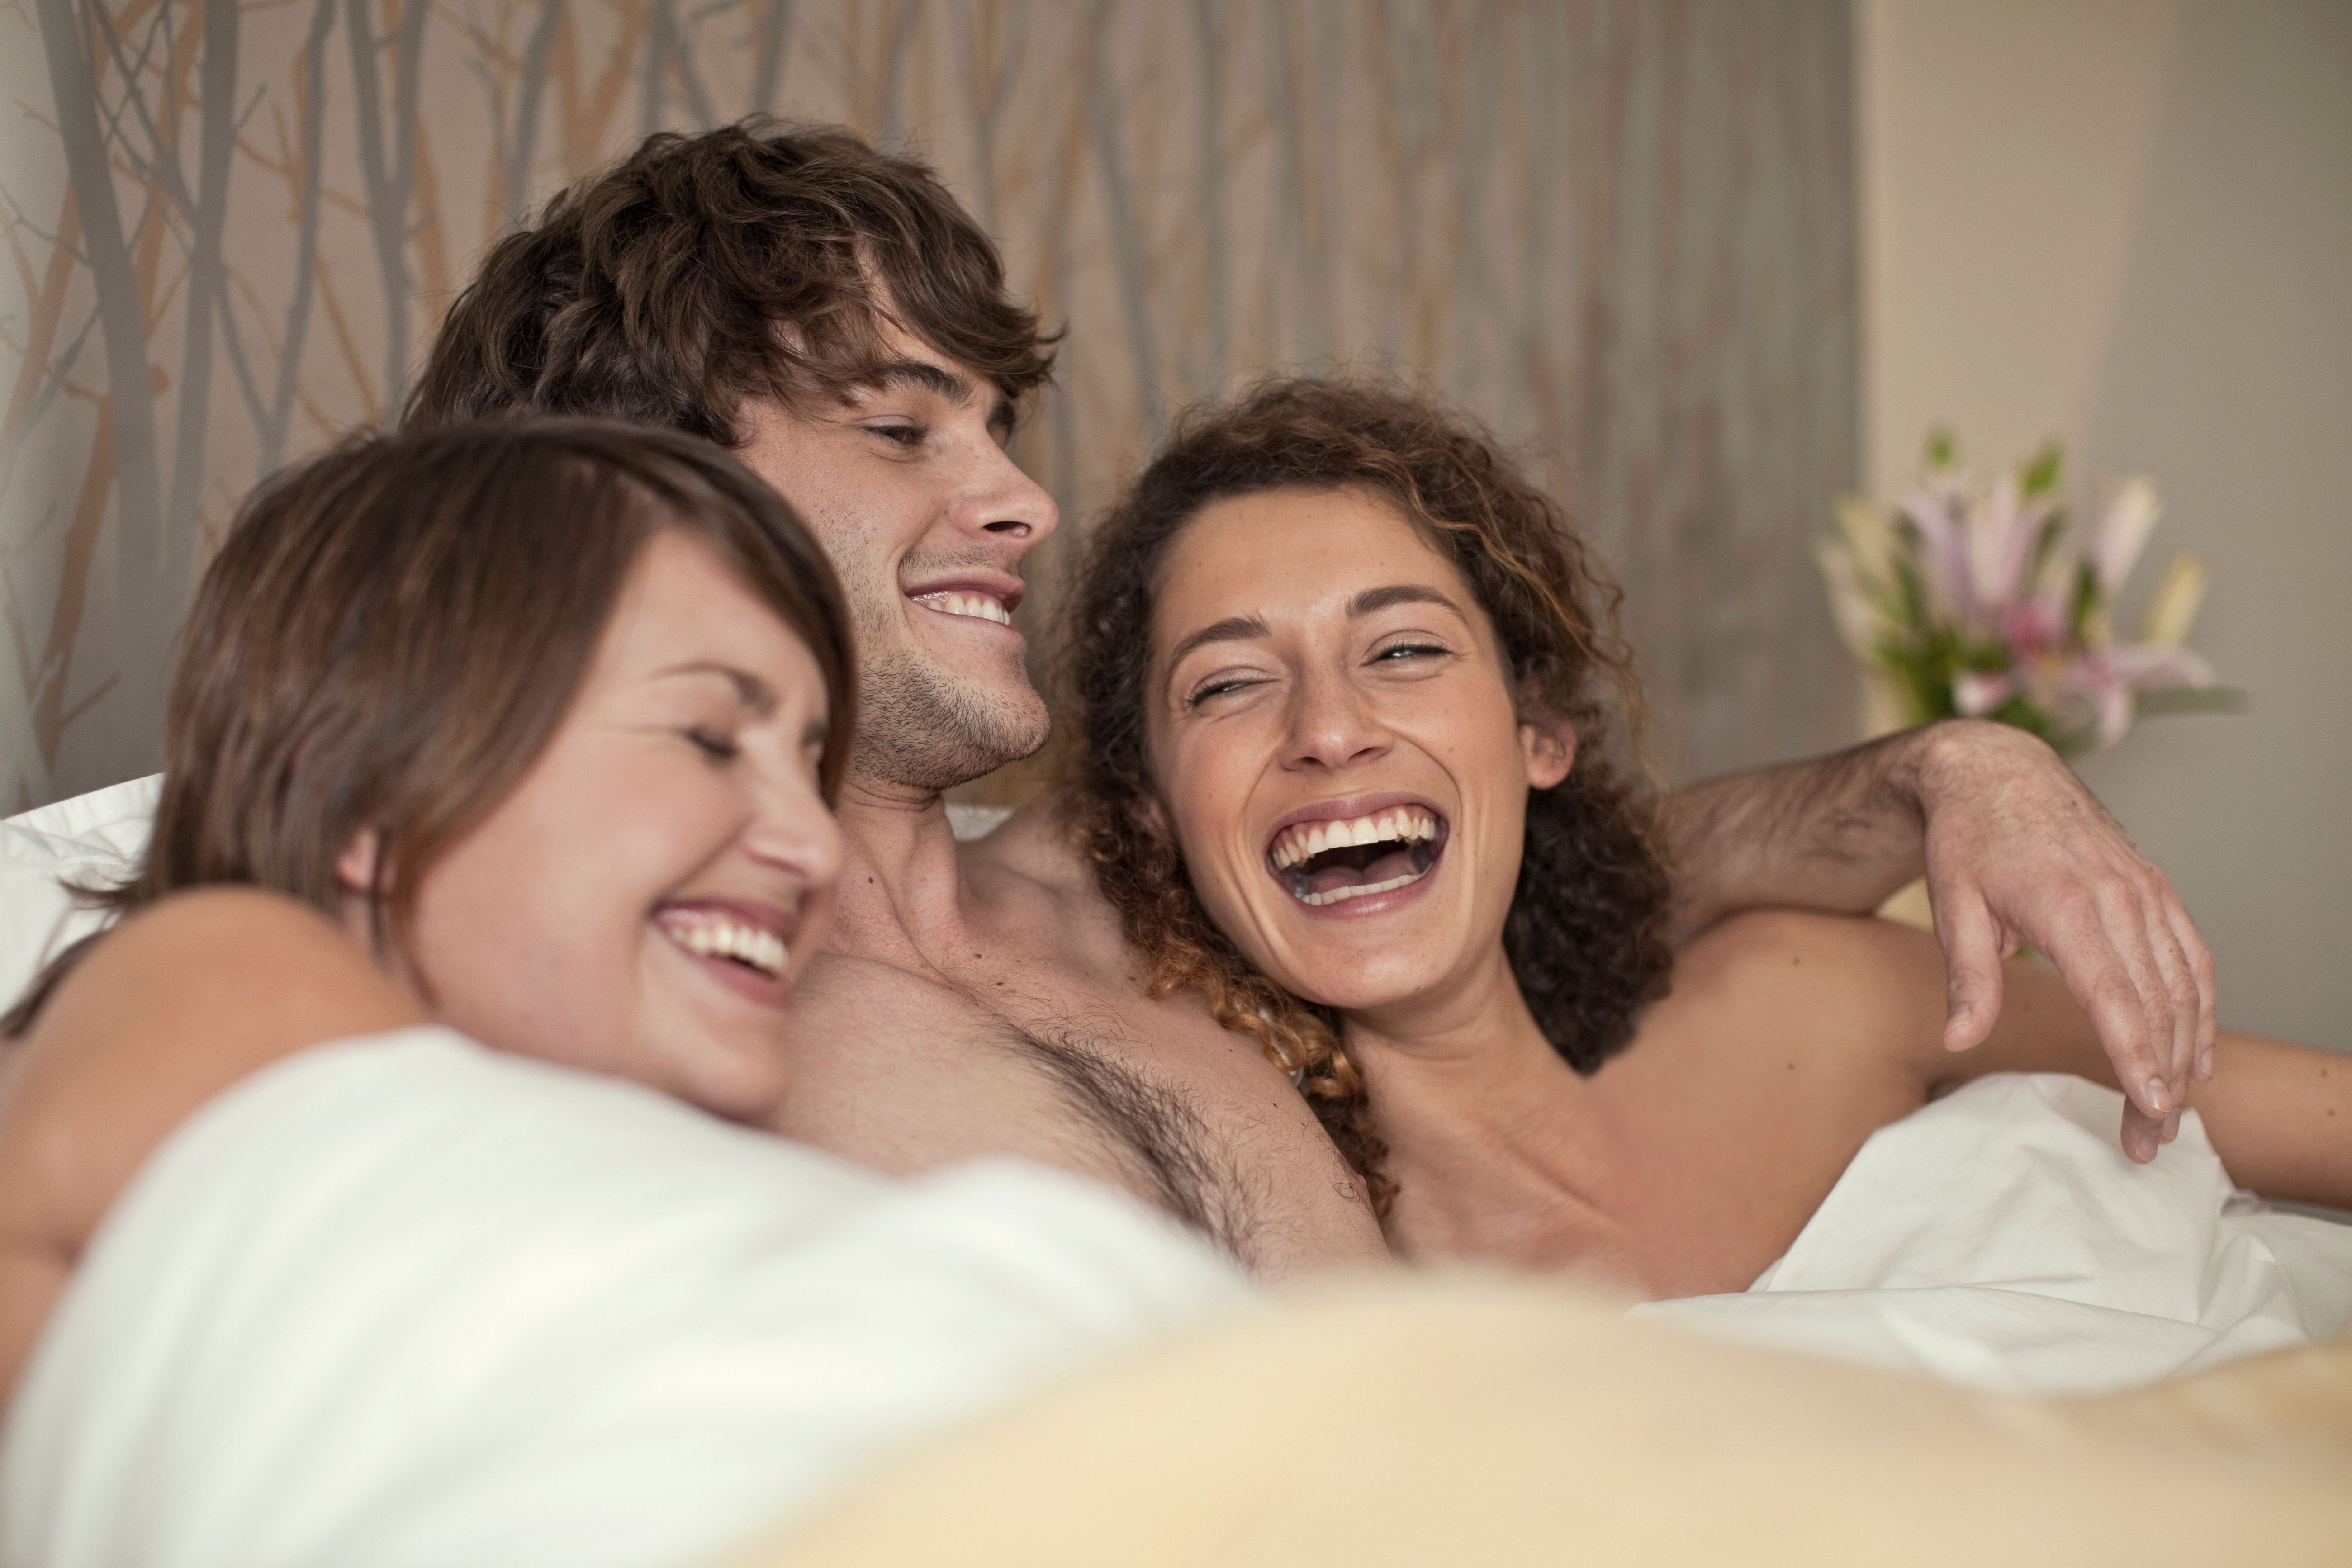 Threesome sex positions